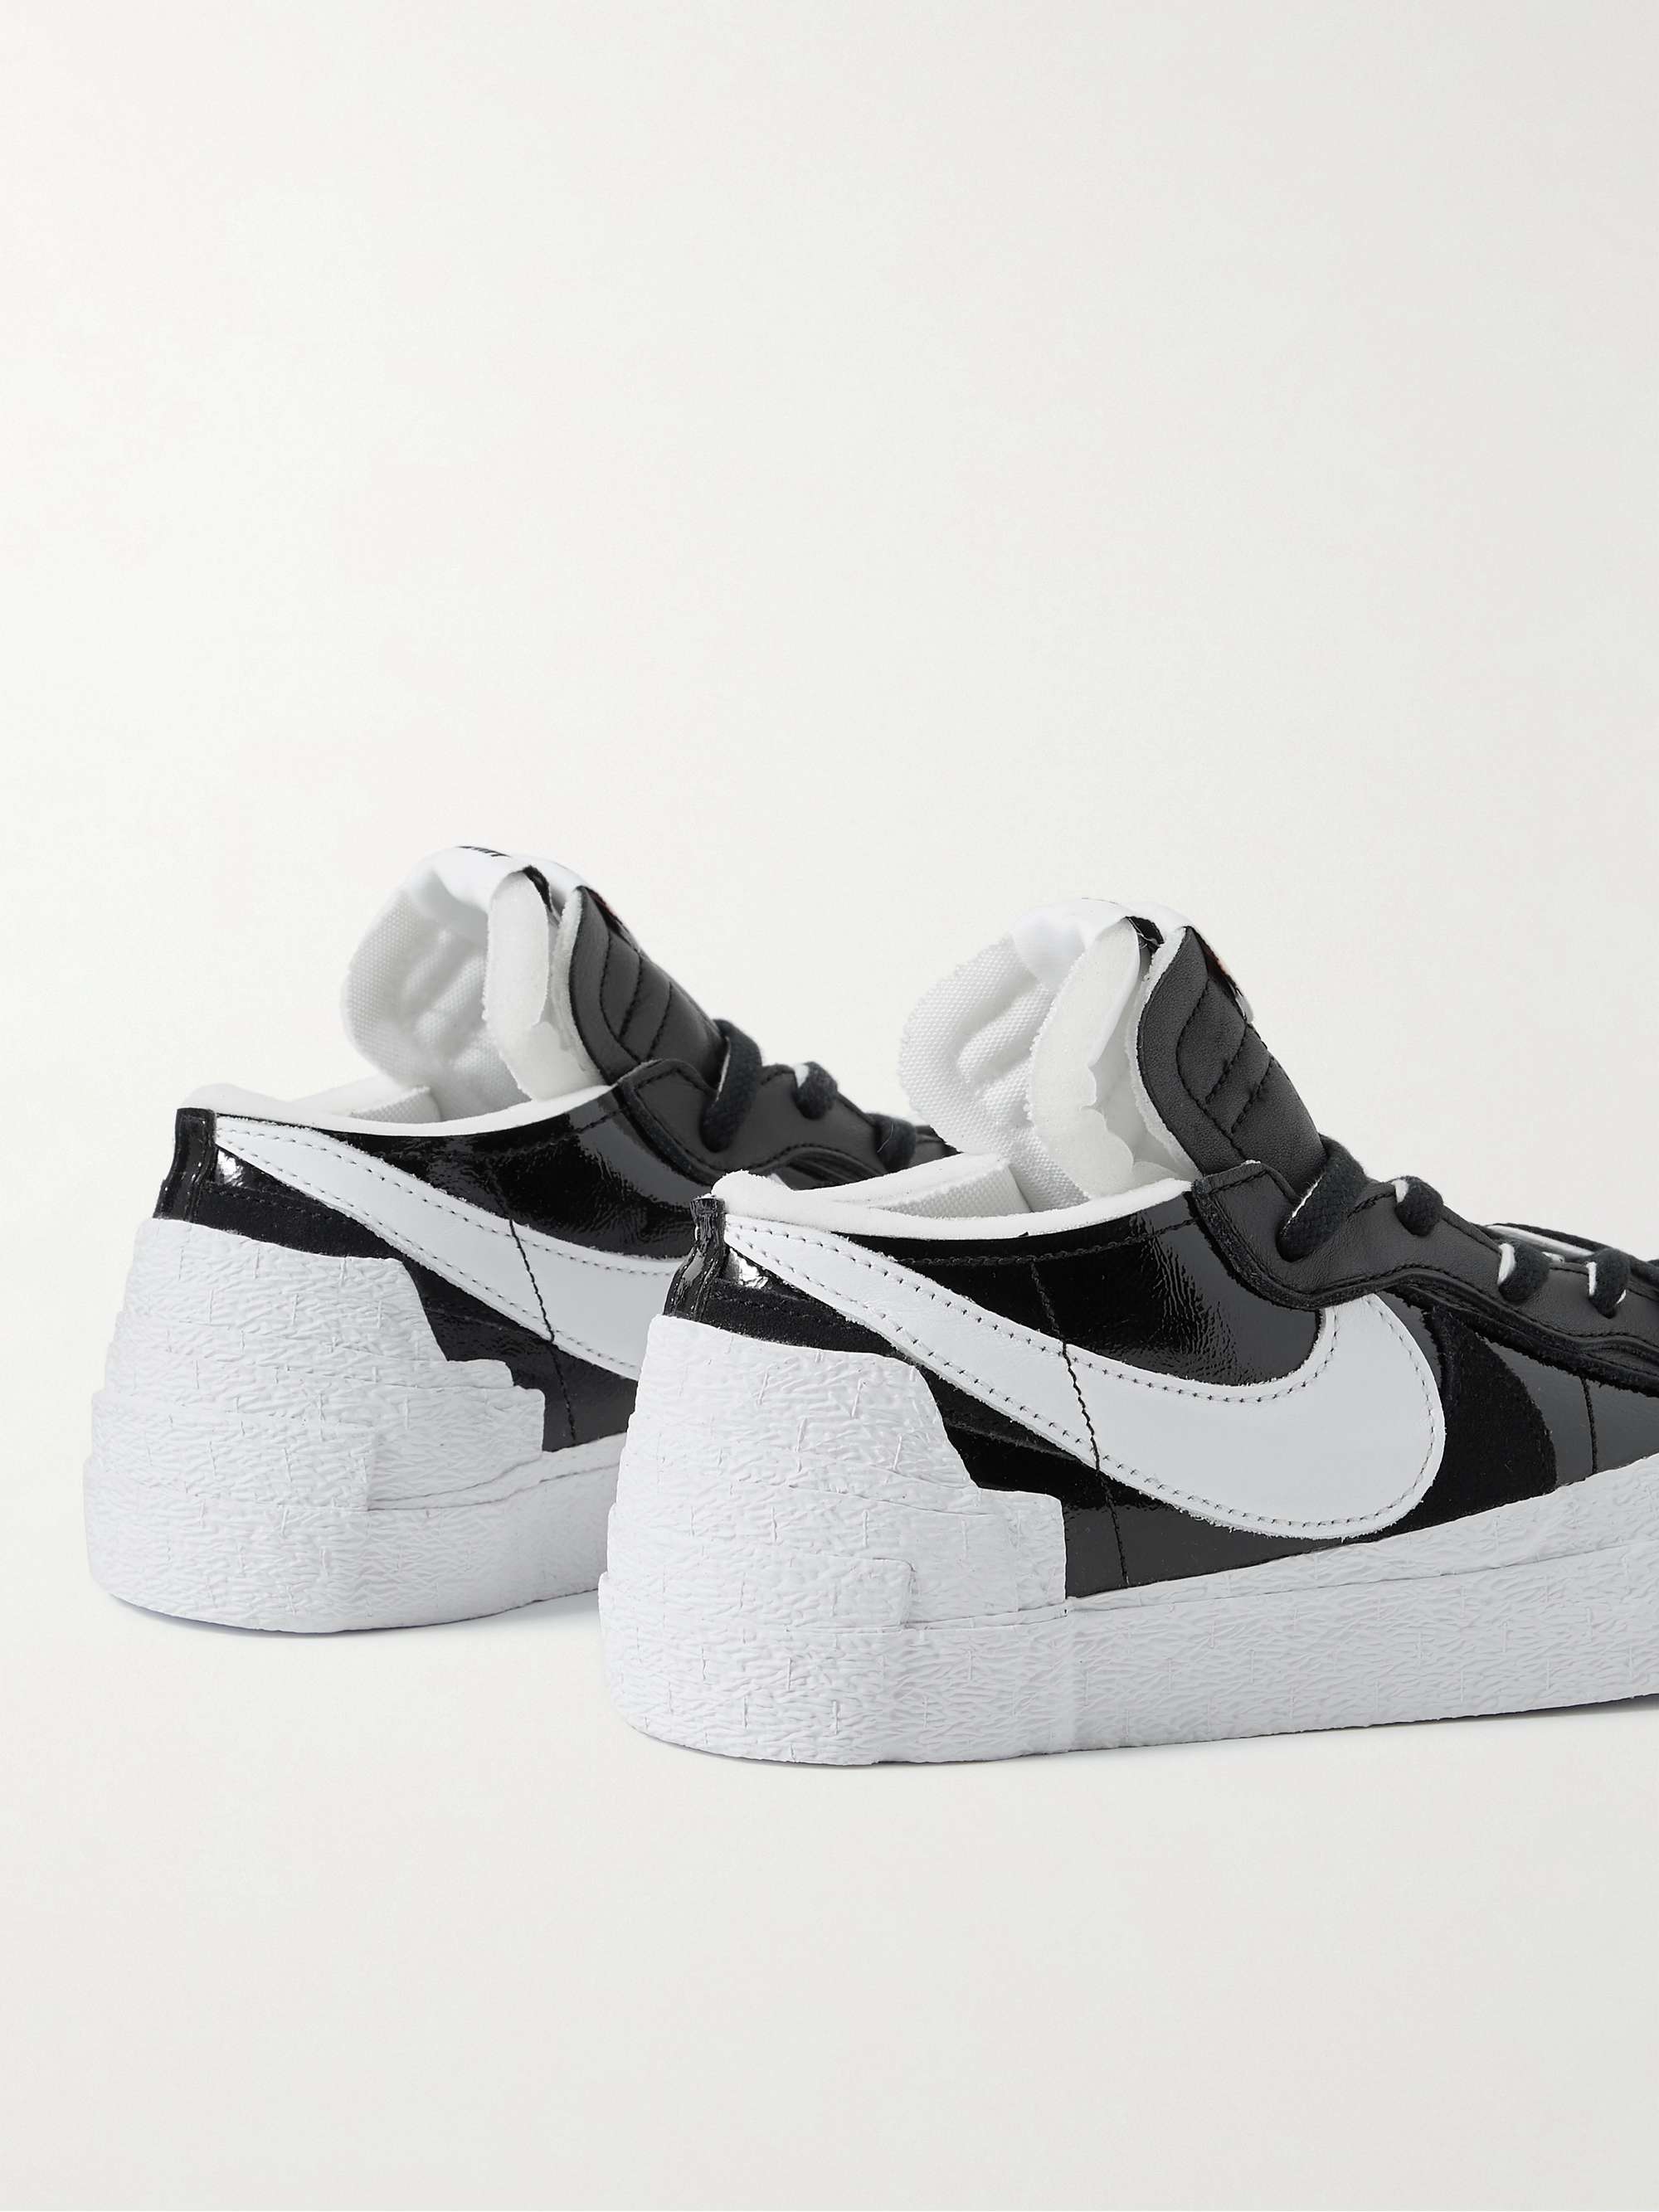 NIKE + Sacai Blazer Low Suede-Trimmed Leather Sneakers | MR PORTER